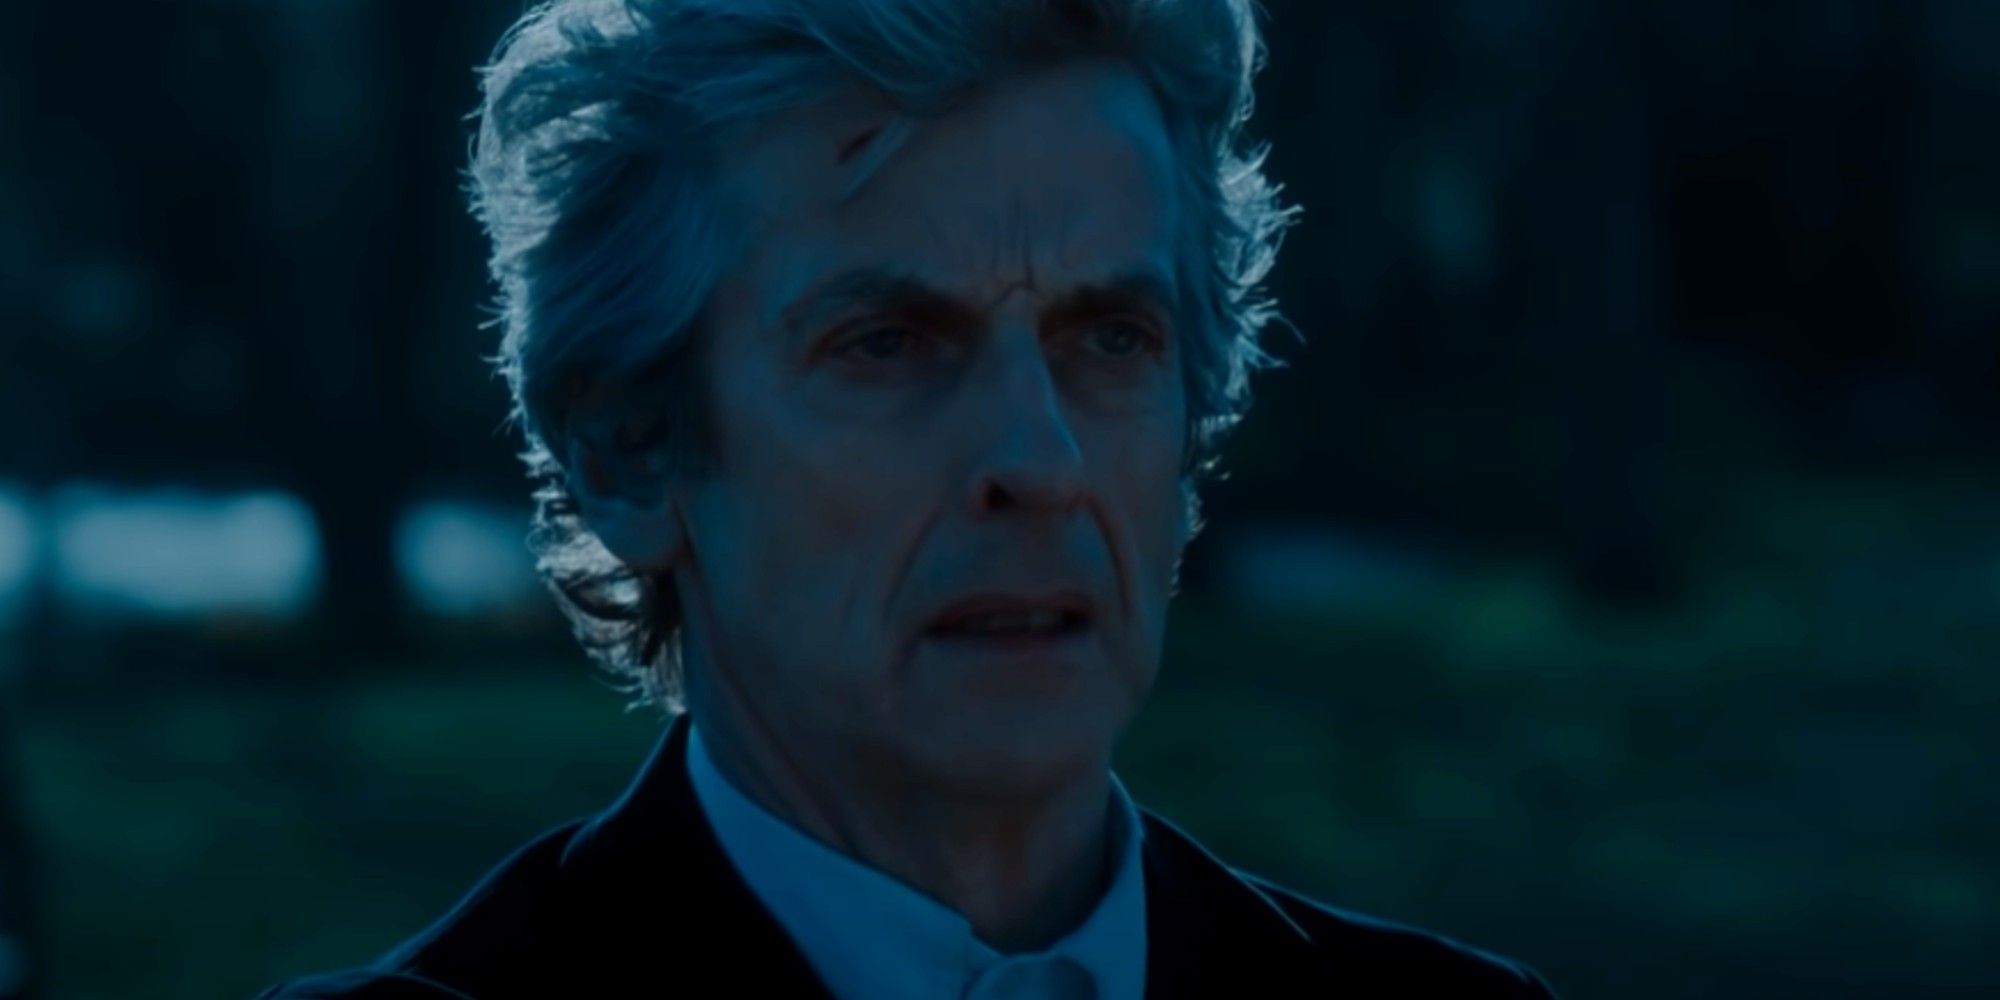  Peter Capaldi as the Twelfth Doctor in blue shadow in Doctor Who's 